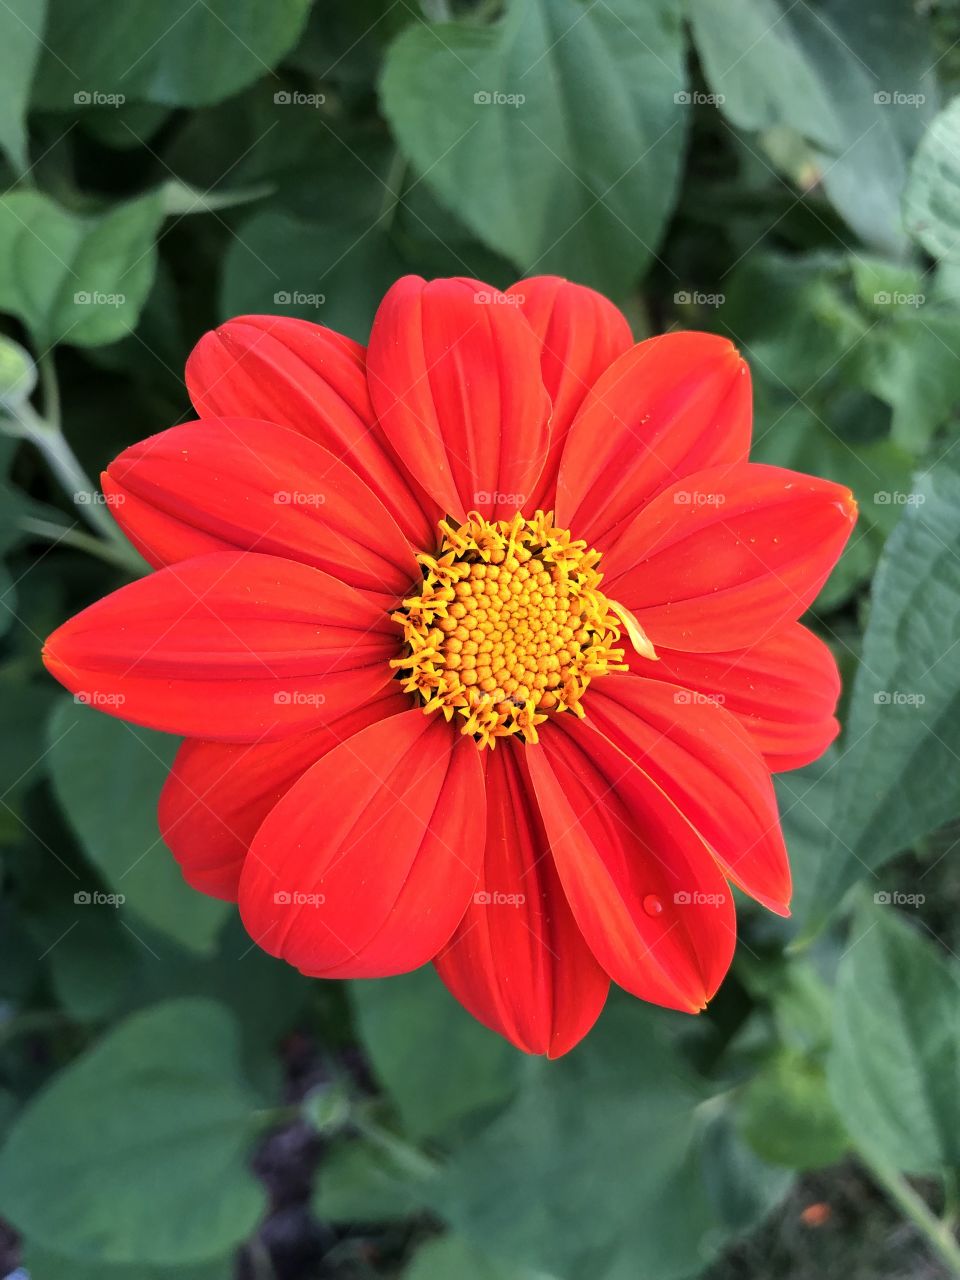 Beautiful red flower with gold center and green leaves in the background. 